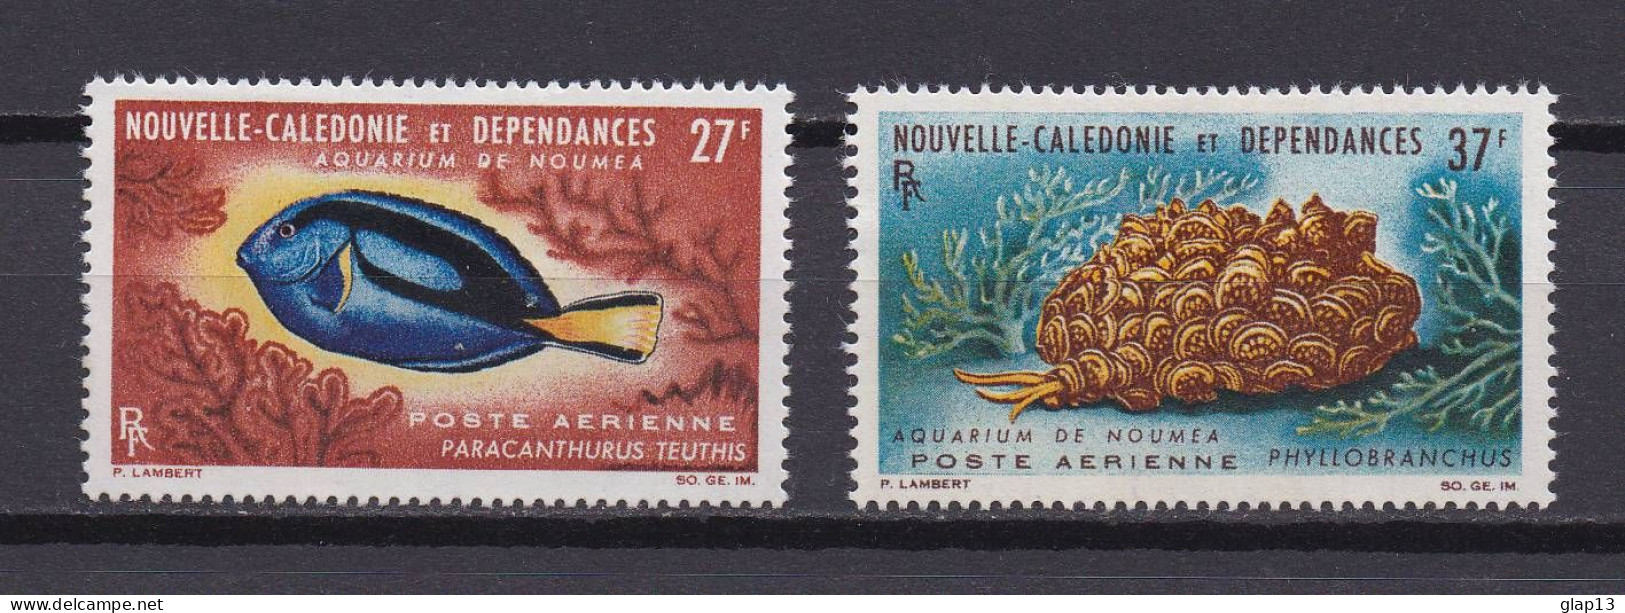 NOUVELLE-CALEDONIE 1965 PA N°77/78 NEUF AVEC CHARNIERE FAUNE MARINE - Nuevos